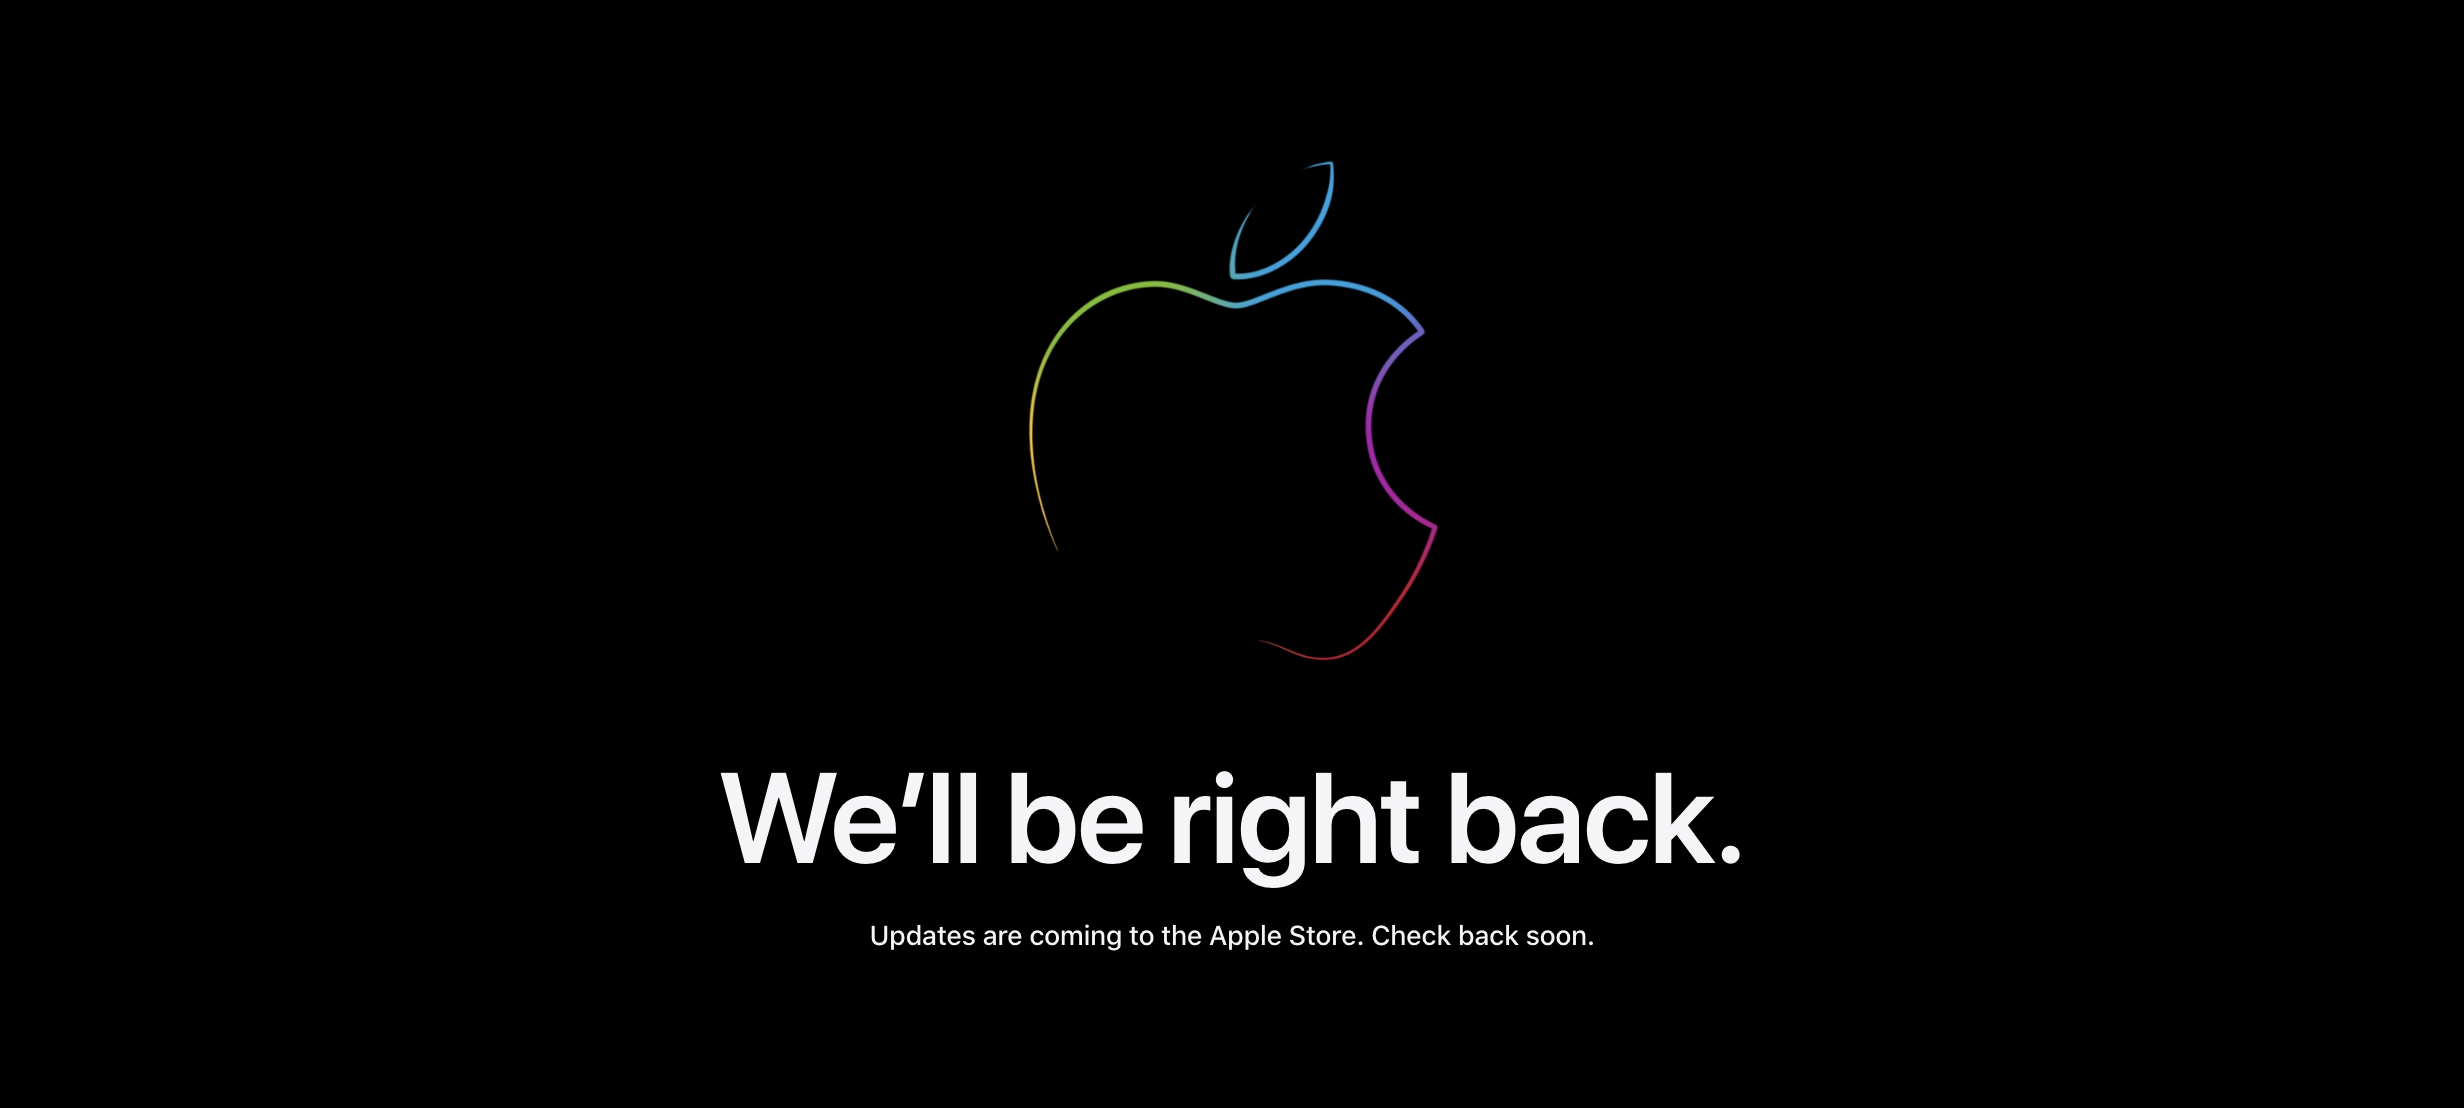 Apple Store homepage message saying 'We'll be right back'